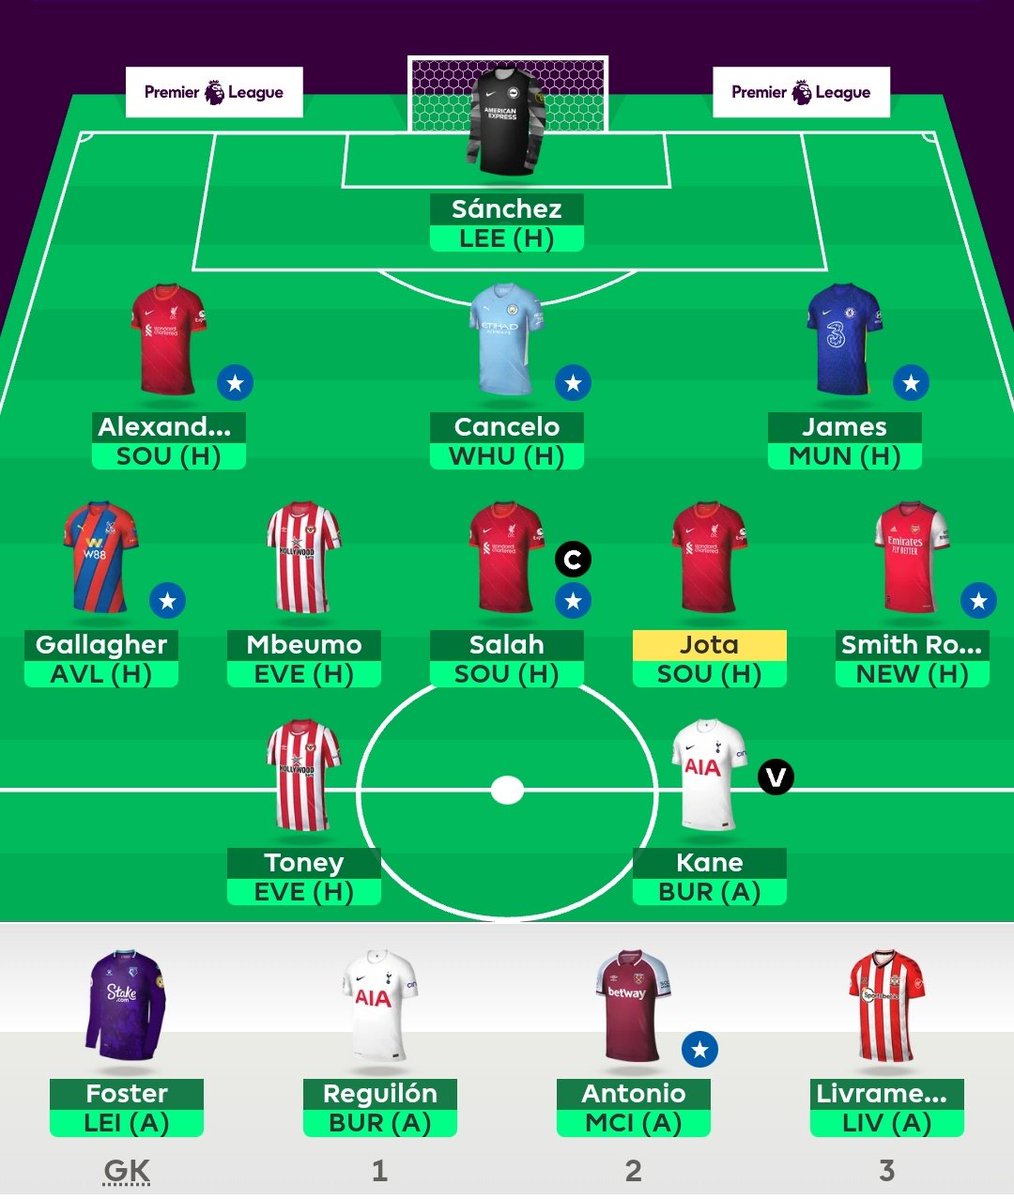 An almost entire home lineup next week. Most likely rolling transfer. Will have to see how Spurs look today, considering bringing Reguilon in for Mbuemo. #fpl https://t.co/Uvco9l5dow